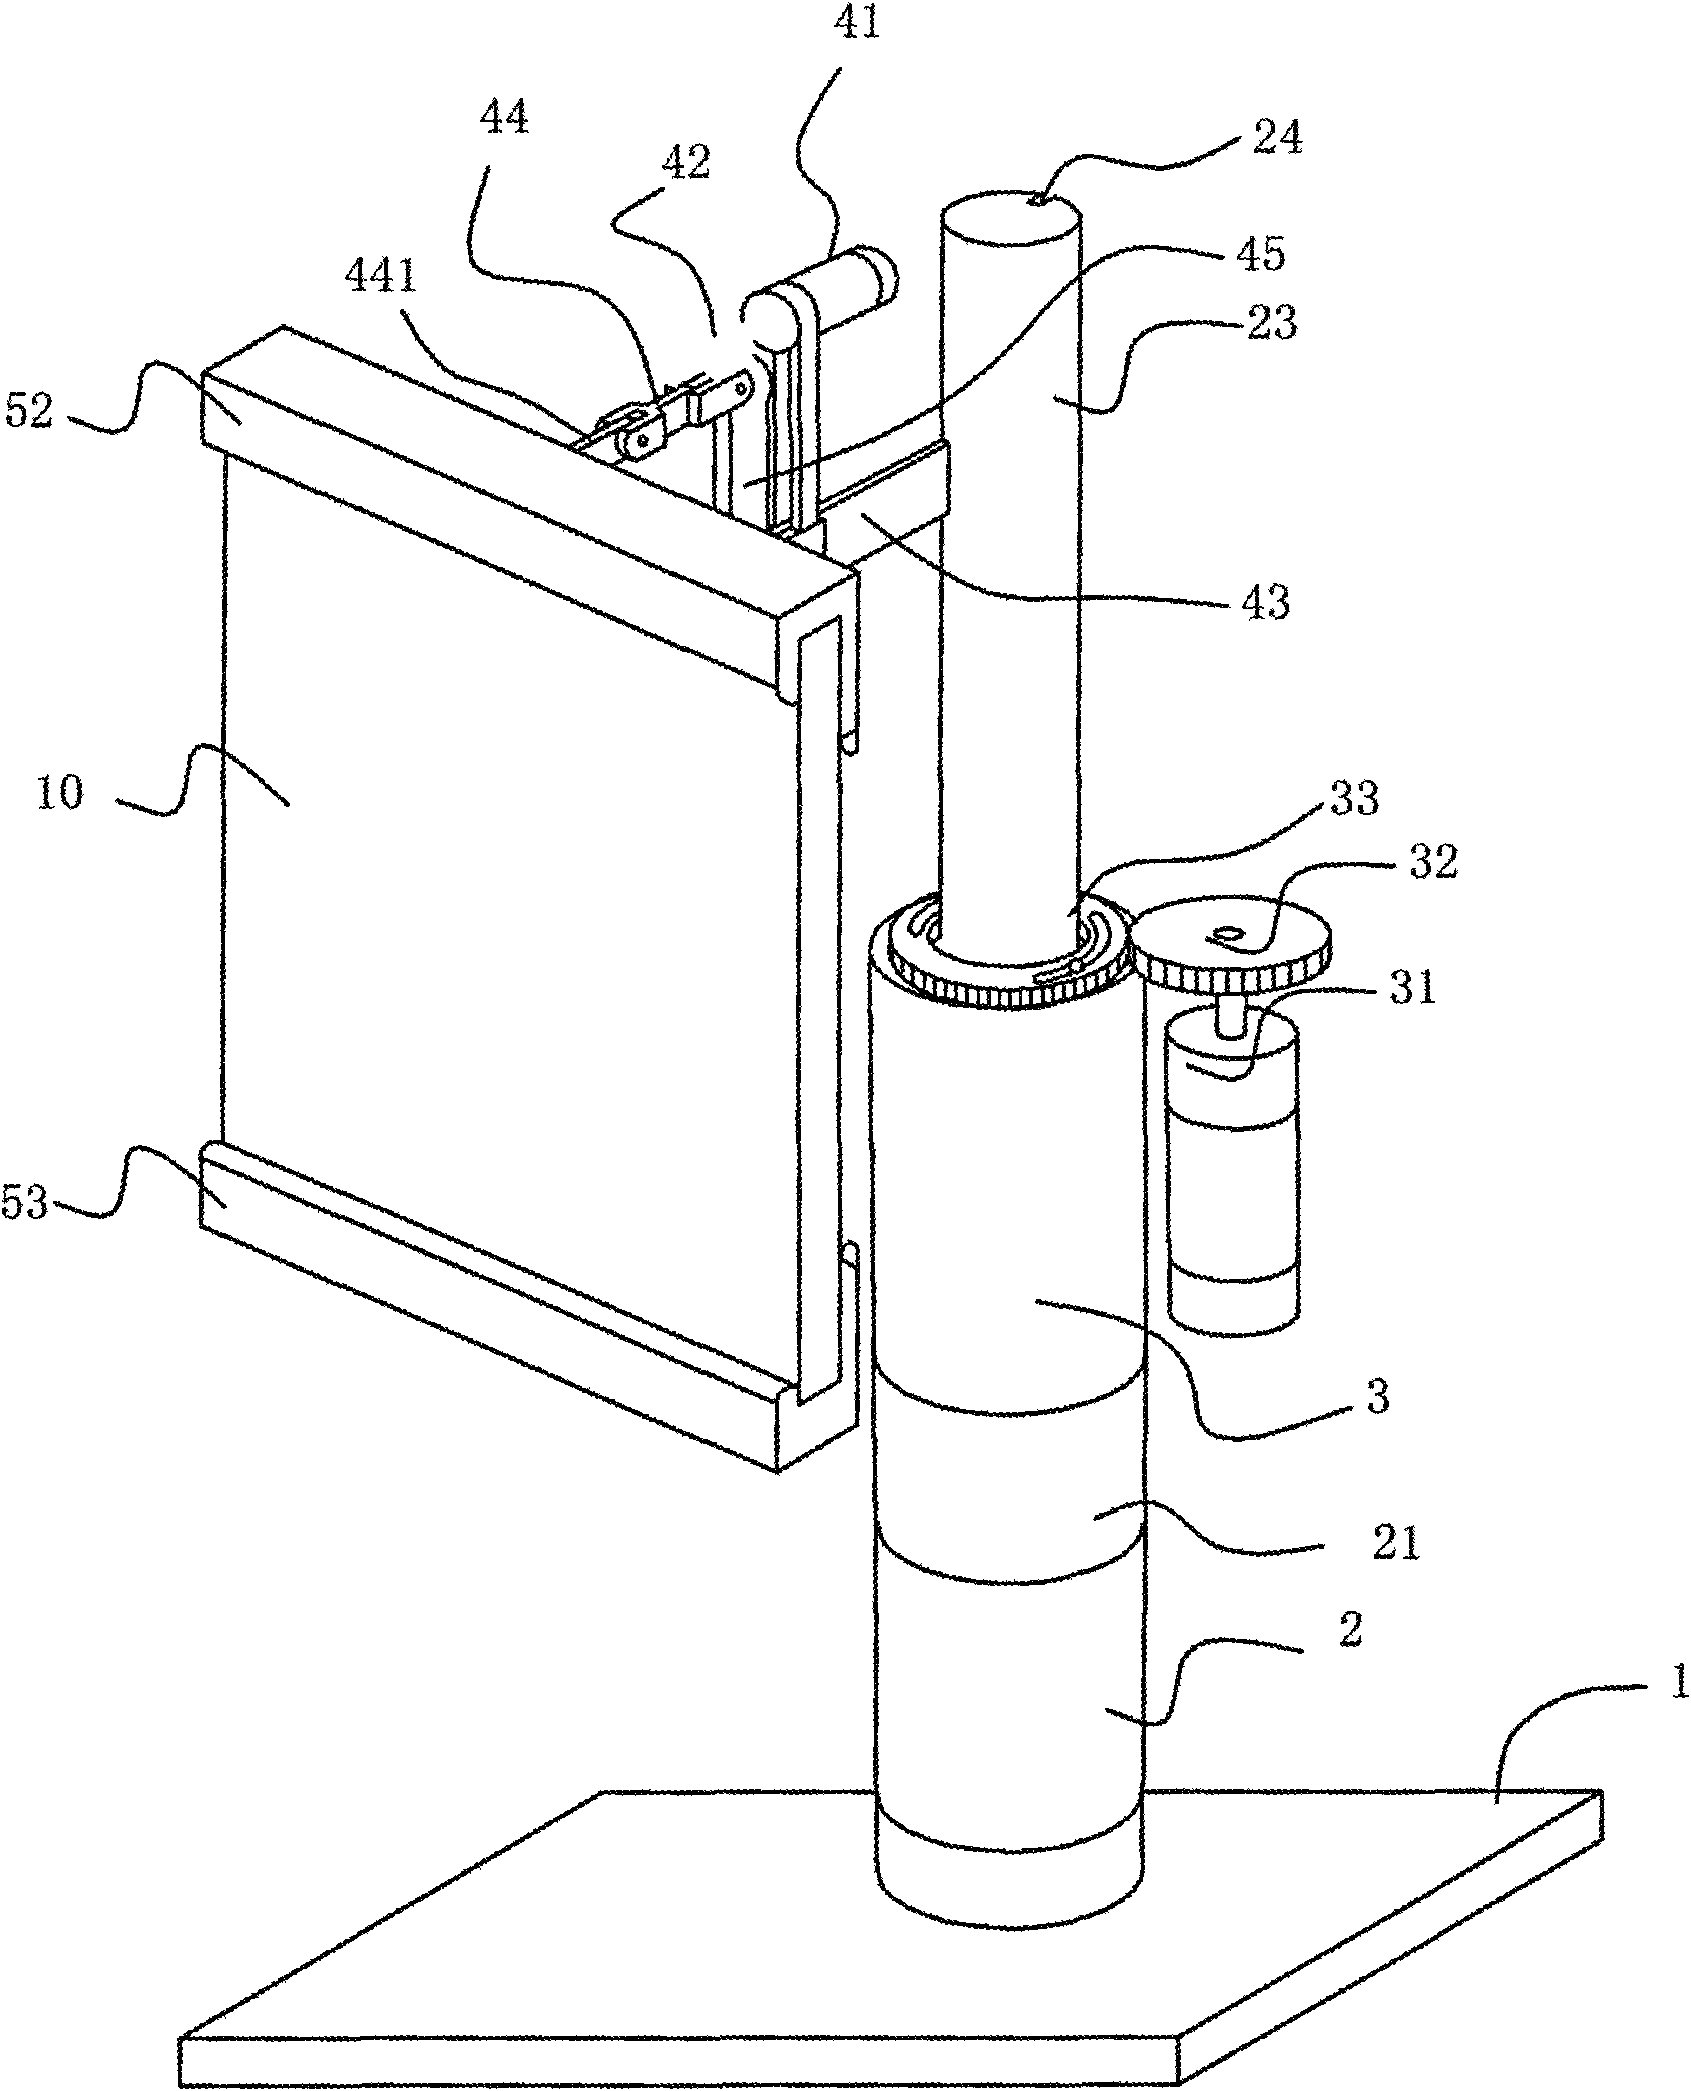 Visual angle regulator for flat televisions and displays